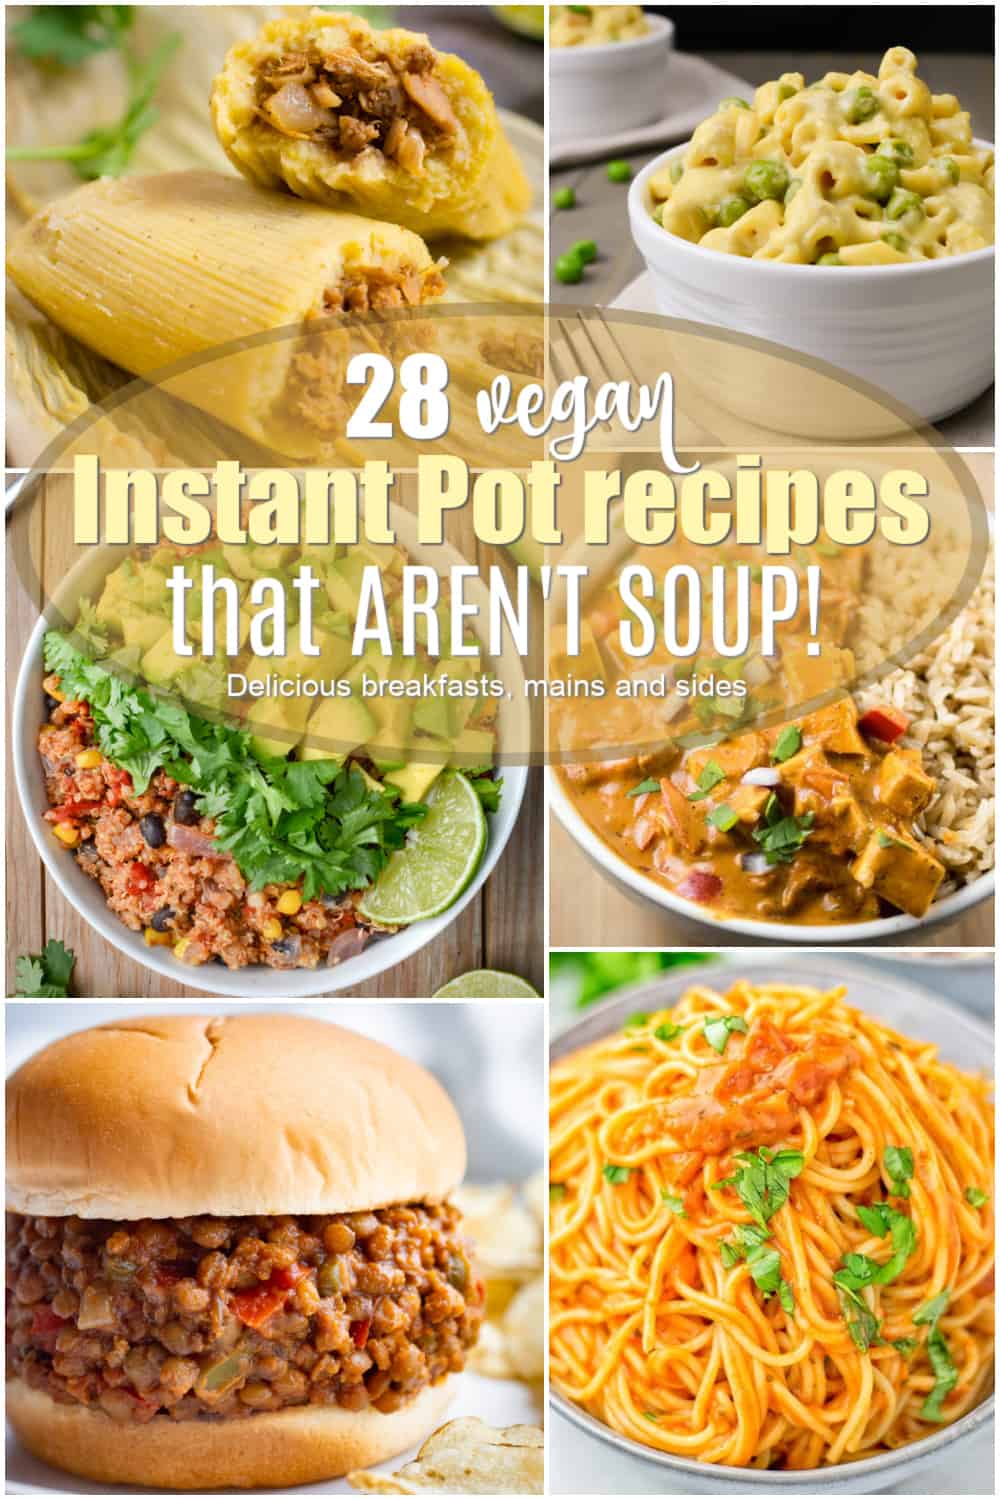 How to Use Your Instant Pot (10 Things You Should Know!) - Detoxinista